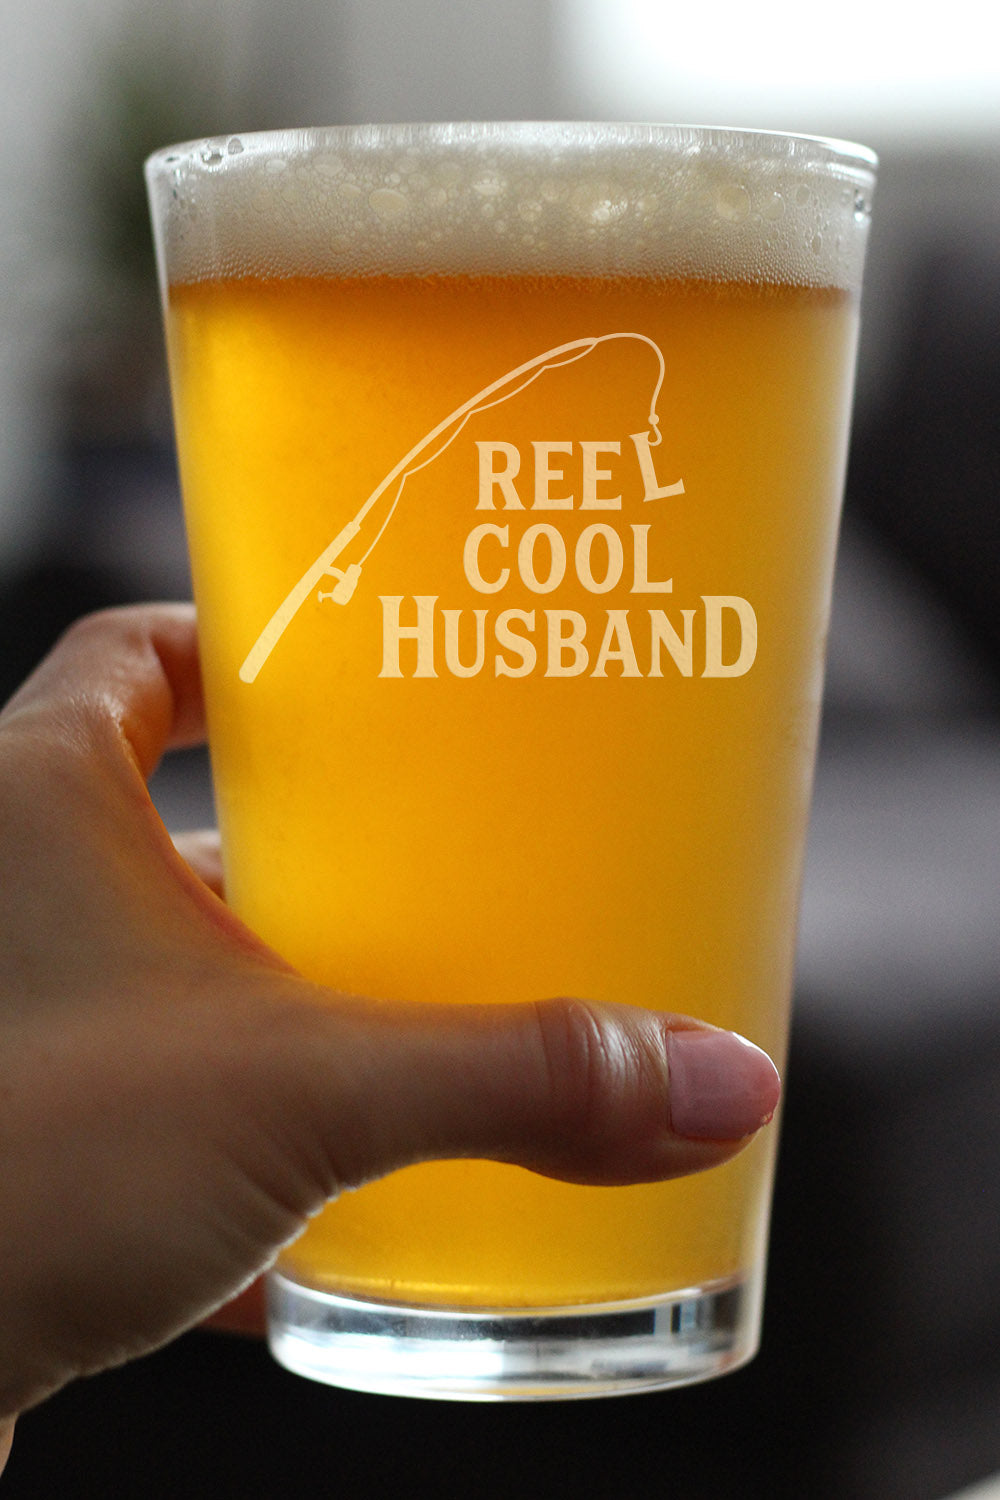 Reel Cool Husband - 16 oz Pint Glass for Beer - Funny Fishing Gifts for Fisherman Husbands - Fun Fish Cups